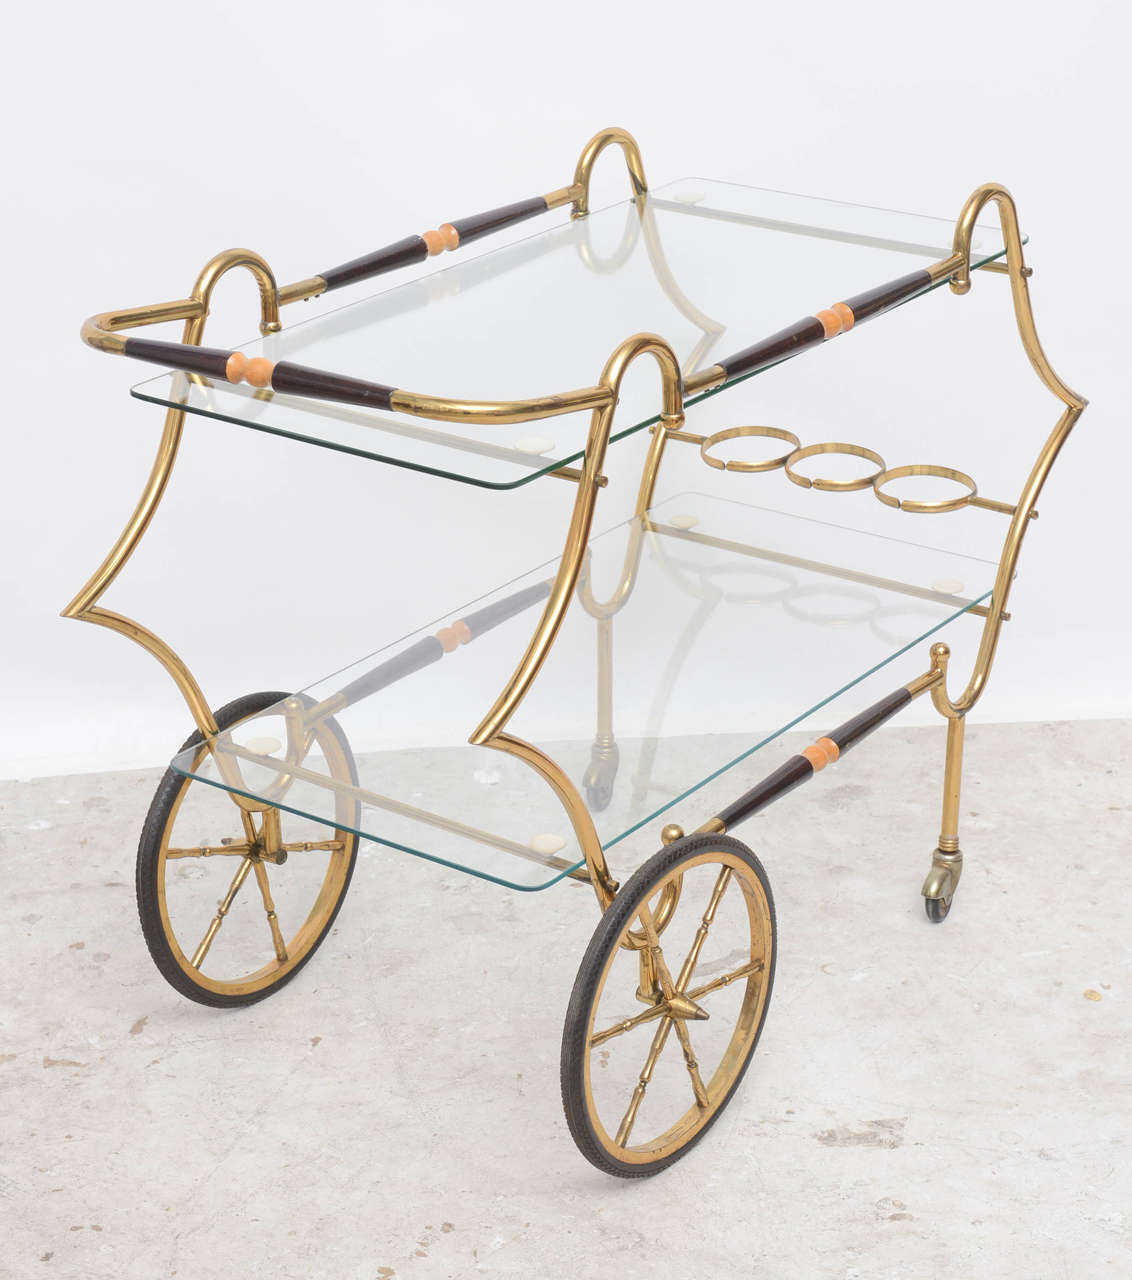 1950s Italian brass and glass trolley serving or bar cart, two-tiered with bottle rests, stretcher side bars upper and lower tier and push handle is of brass and honed mahogany. A modern interpretation or take of the Georgian period in style and